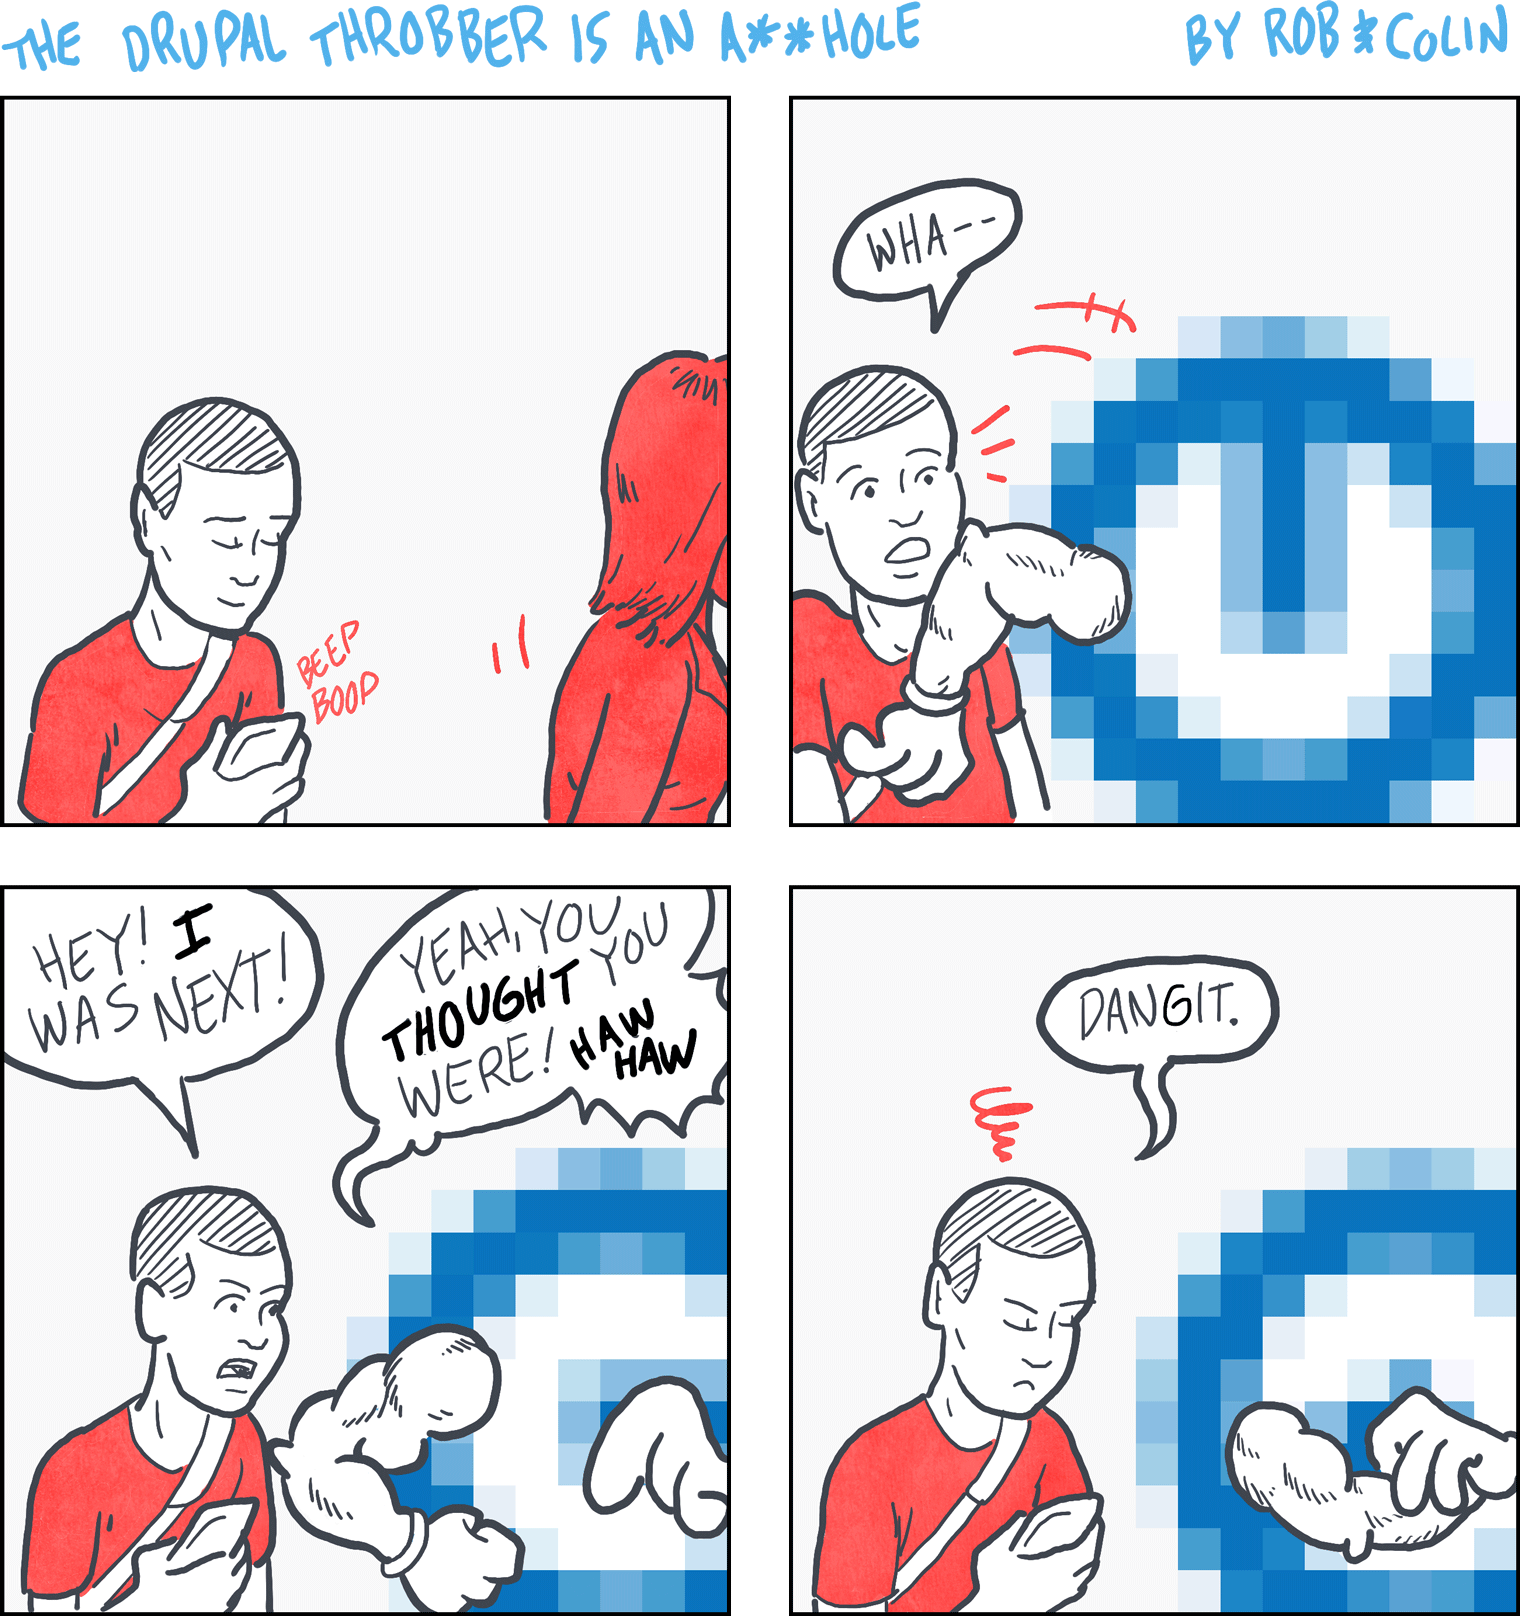 The Drupal Throbber Is AN A-Hole comic episode 1